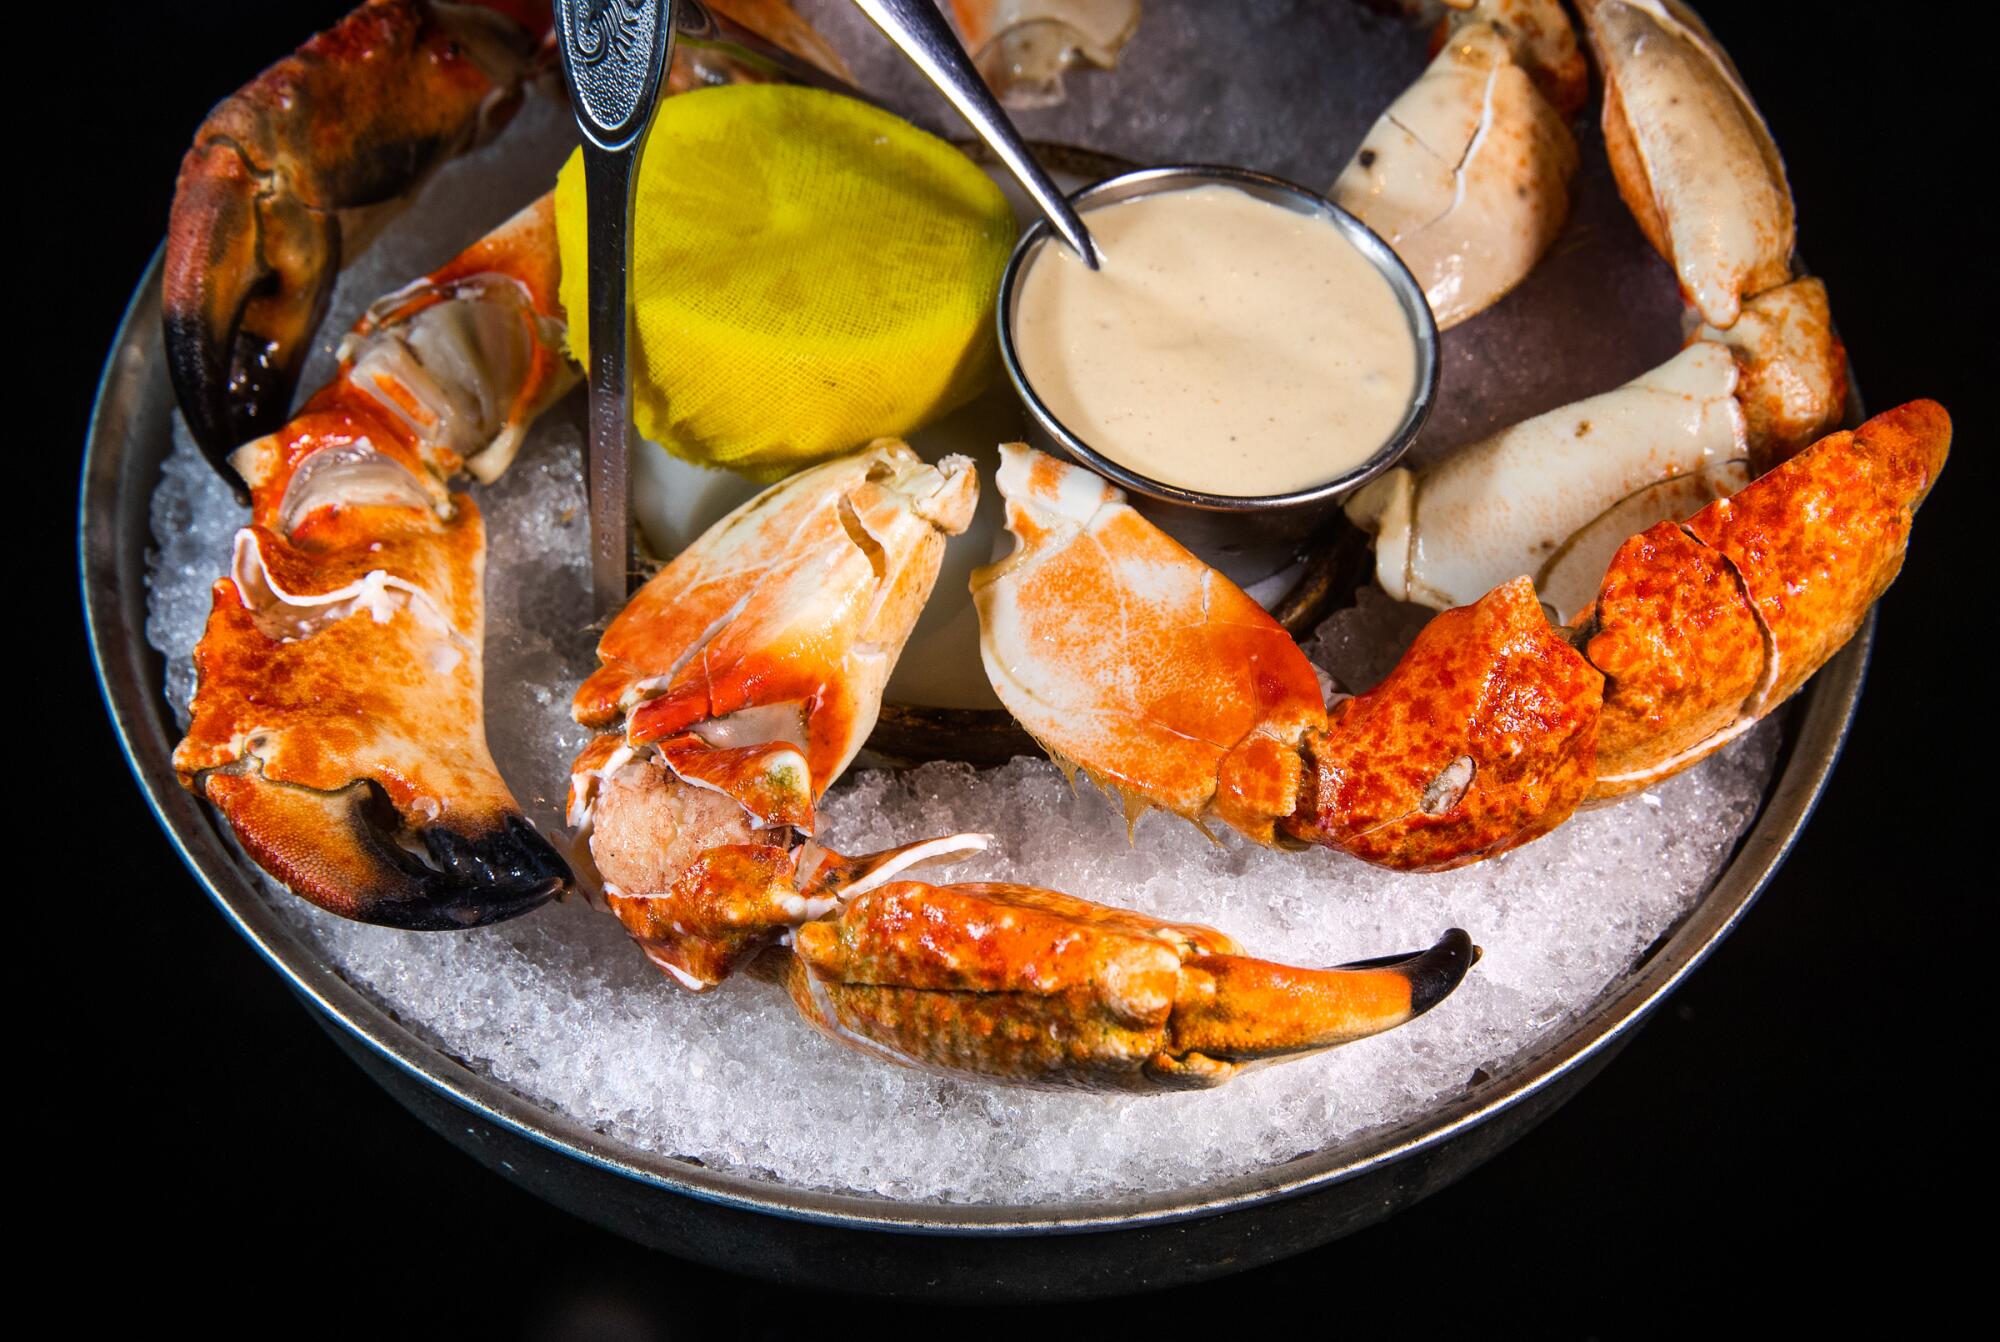 Stone crab claws sit on top of a platter filled with ice